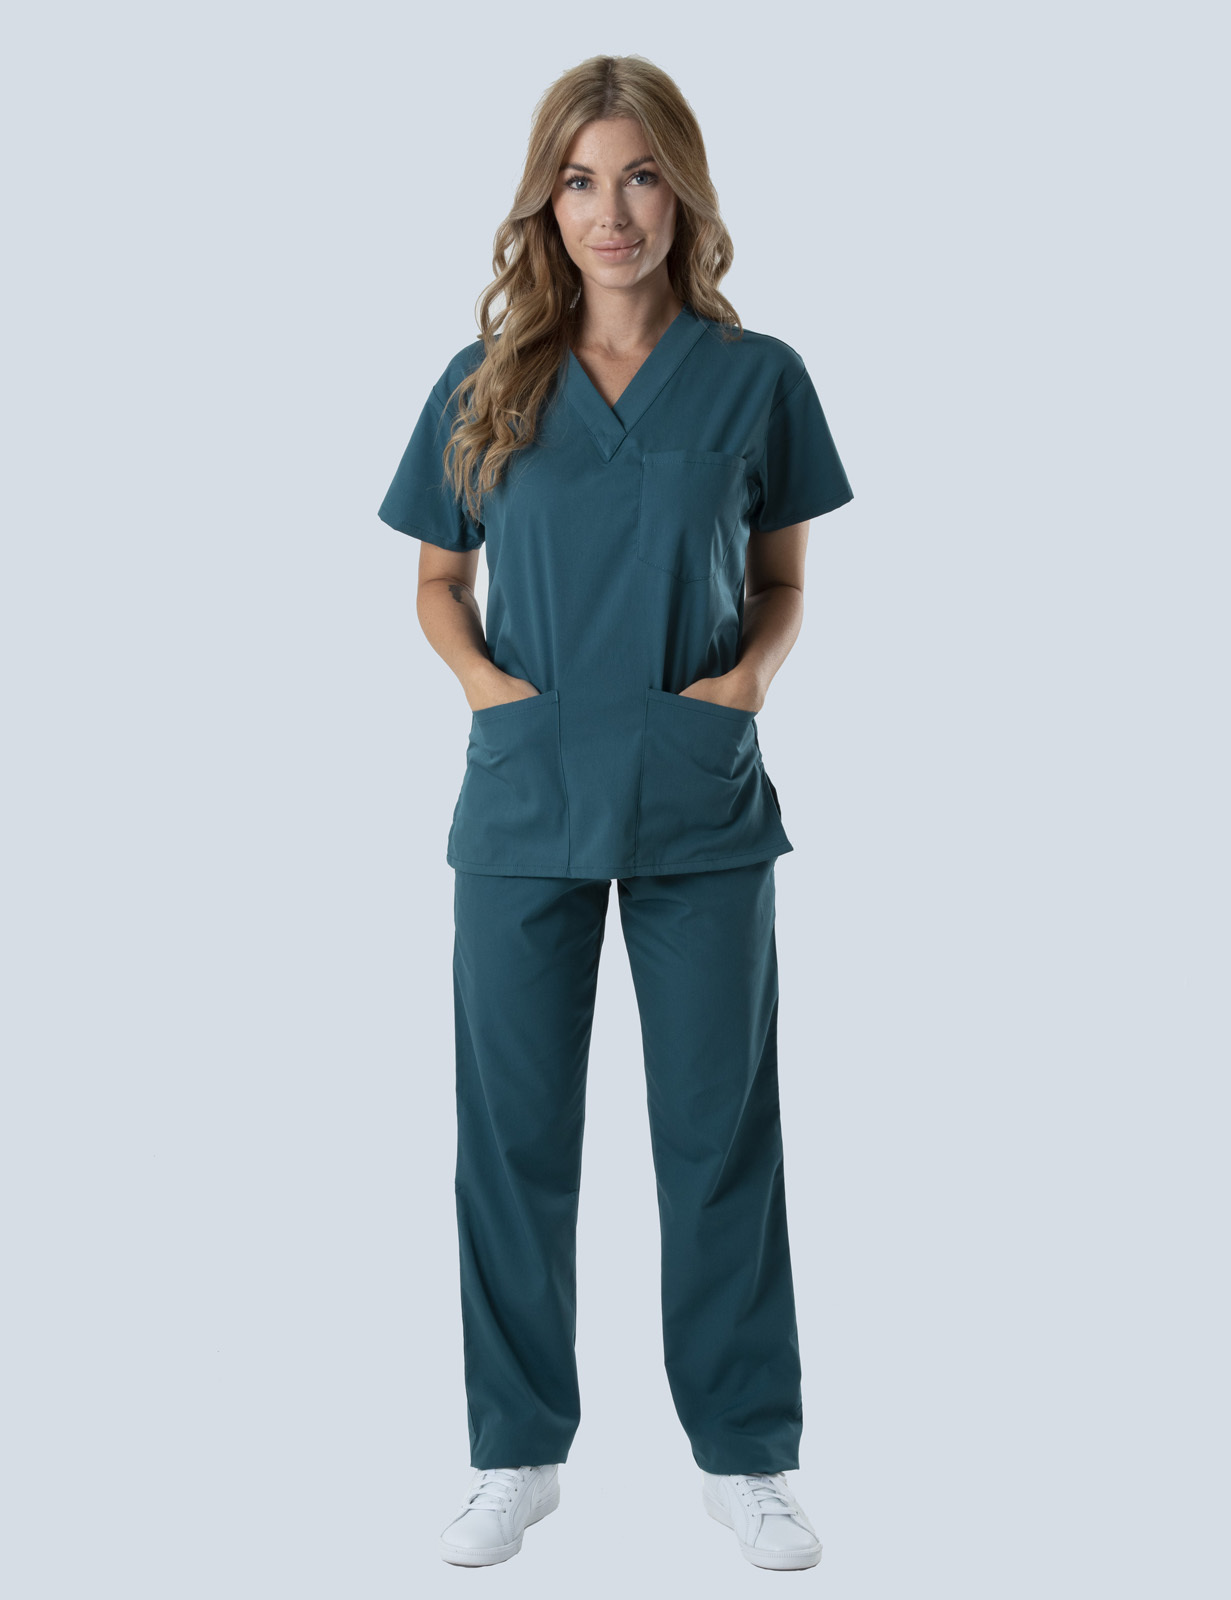 Ipswich Hospital Occupational Therapy-Occupational Therapist Uniform Set Bundle ( 4 Pocket Scrub Top And Cargo Scrub Pants In Caribbean + 2 Logos